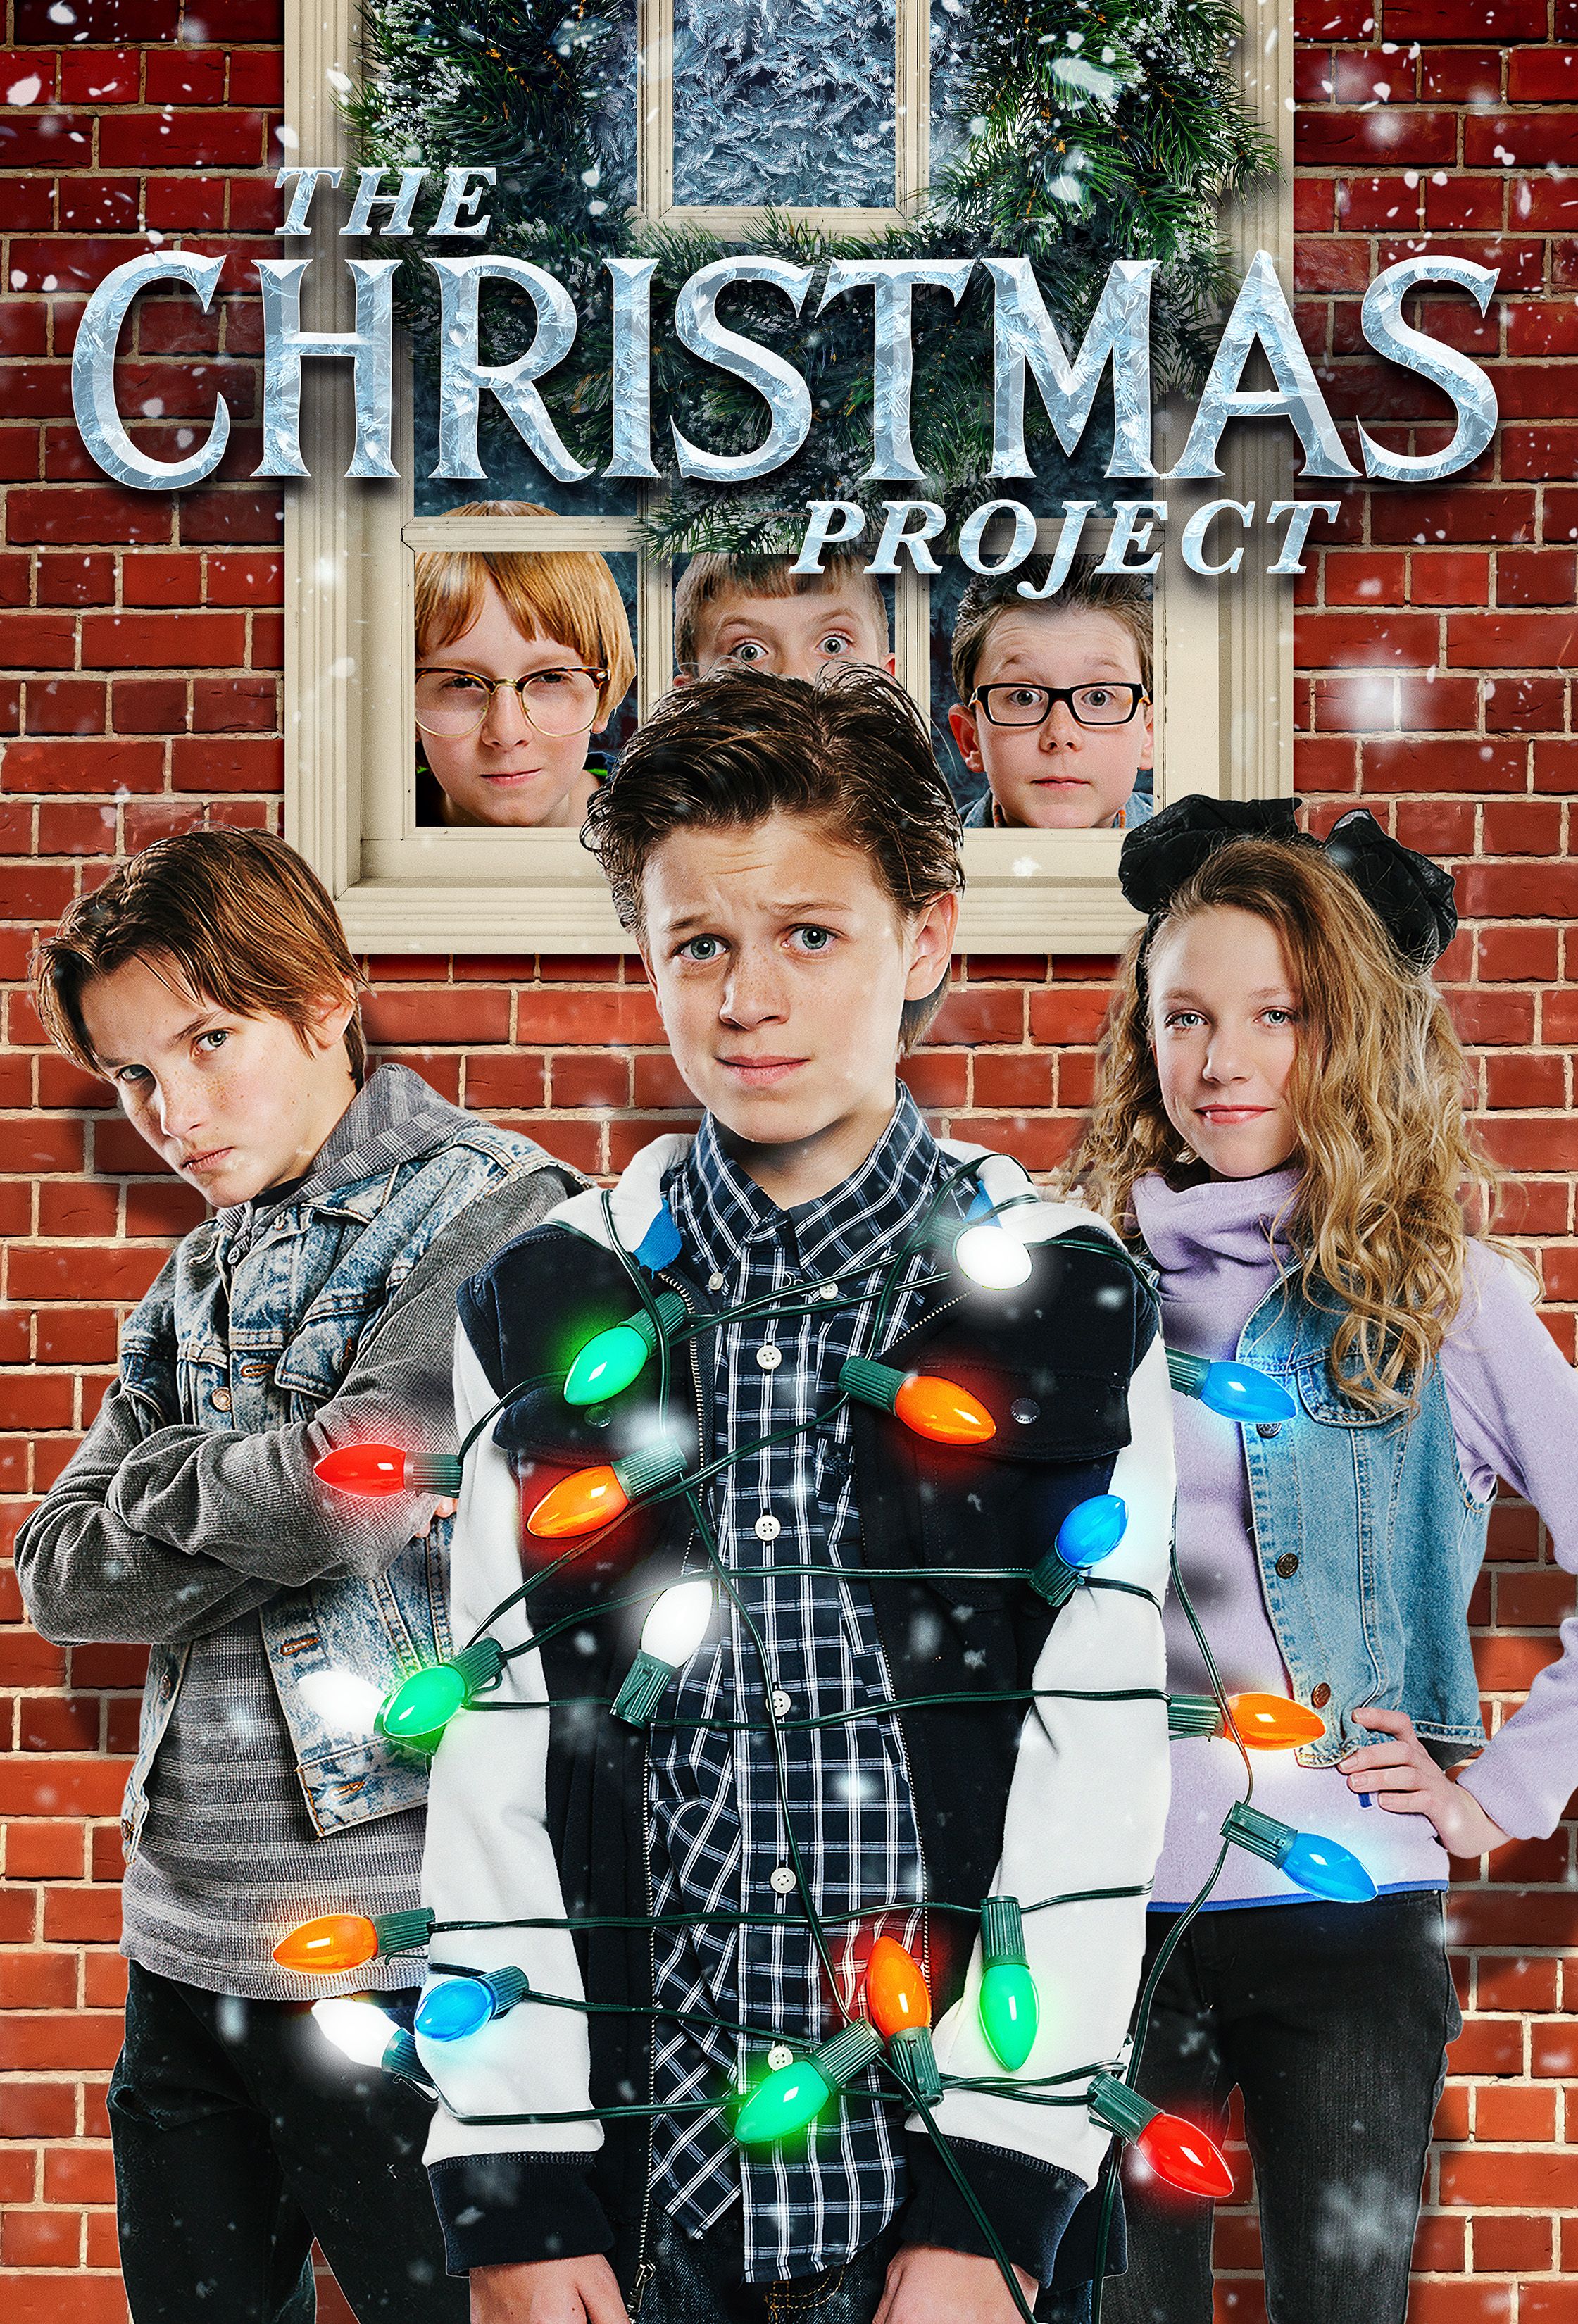 christmas movies on netflix for family